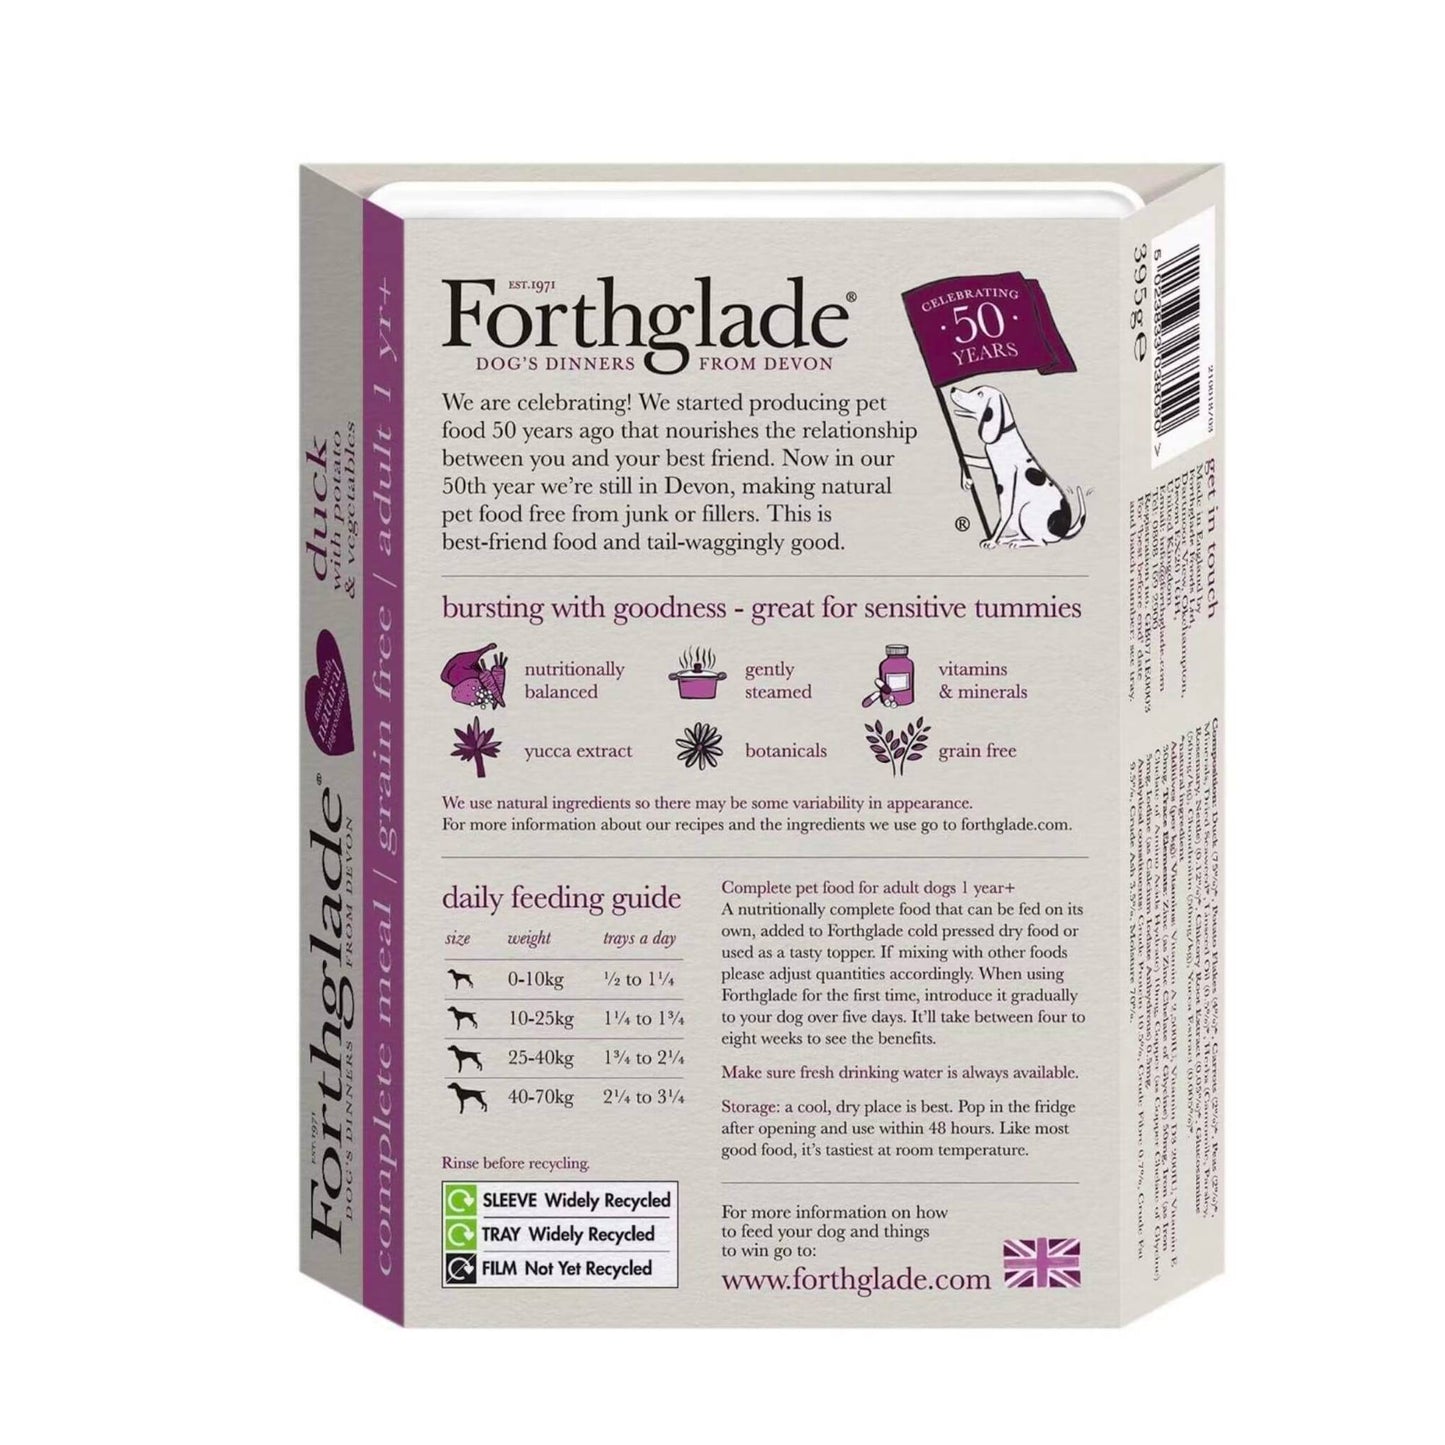 Forthglade Duck feeding guide and ingredients. 